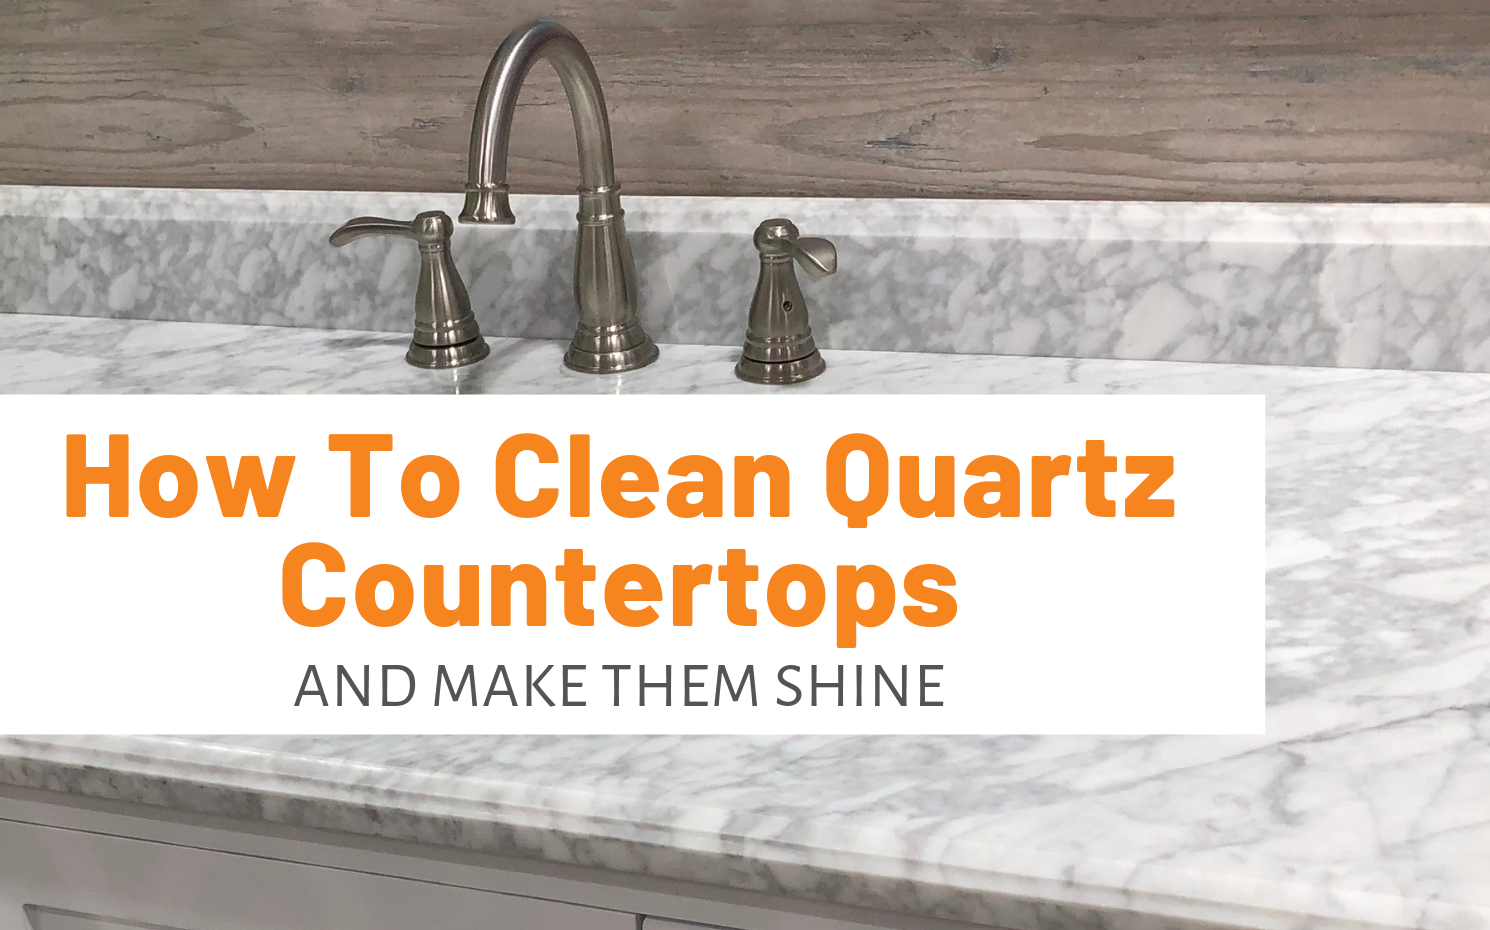 How To Clean Quartz Countertops And Make Them Shine